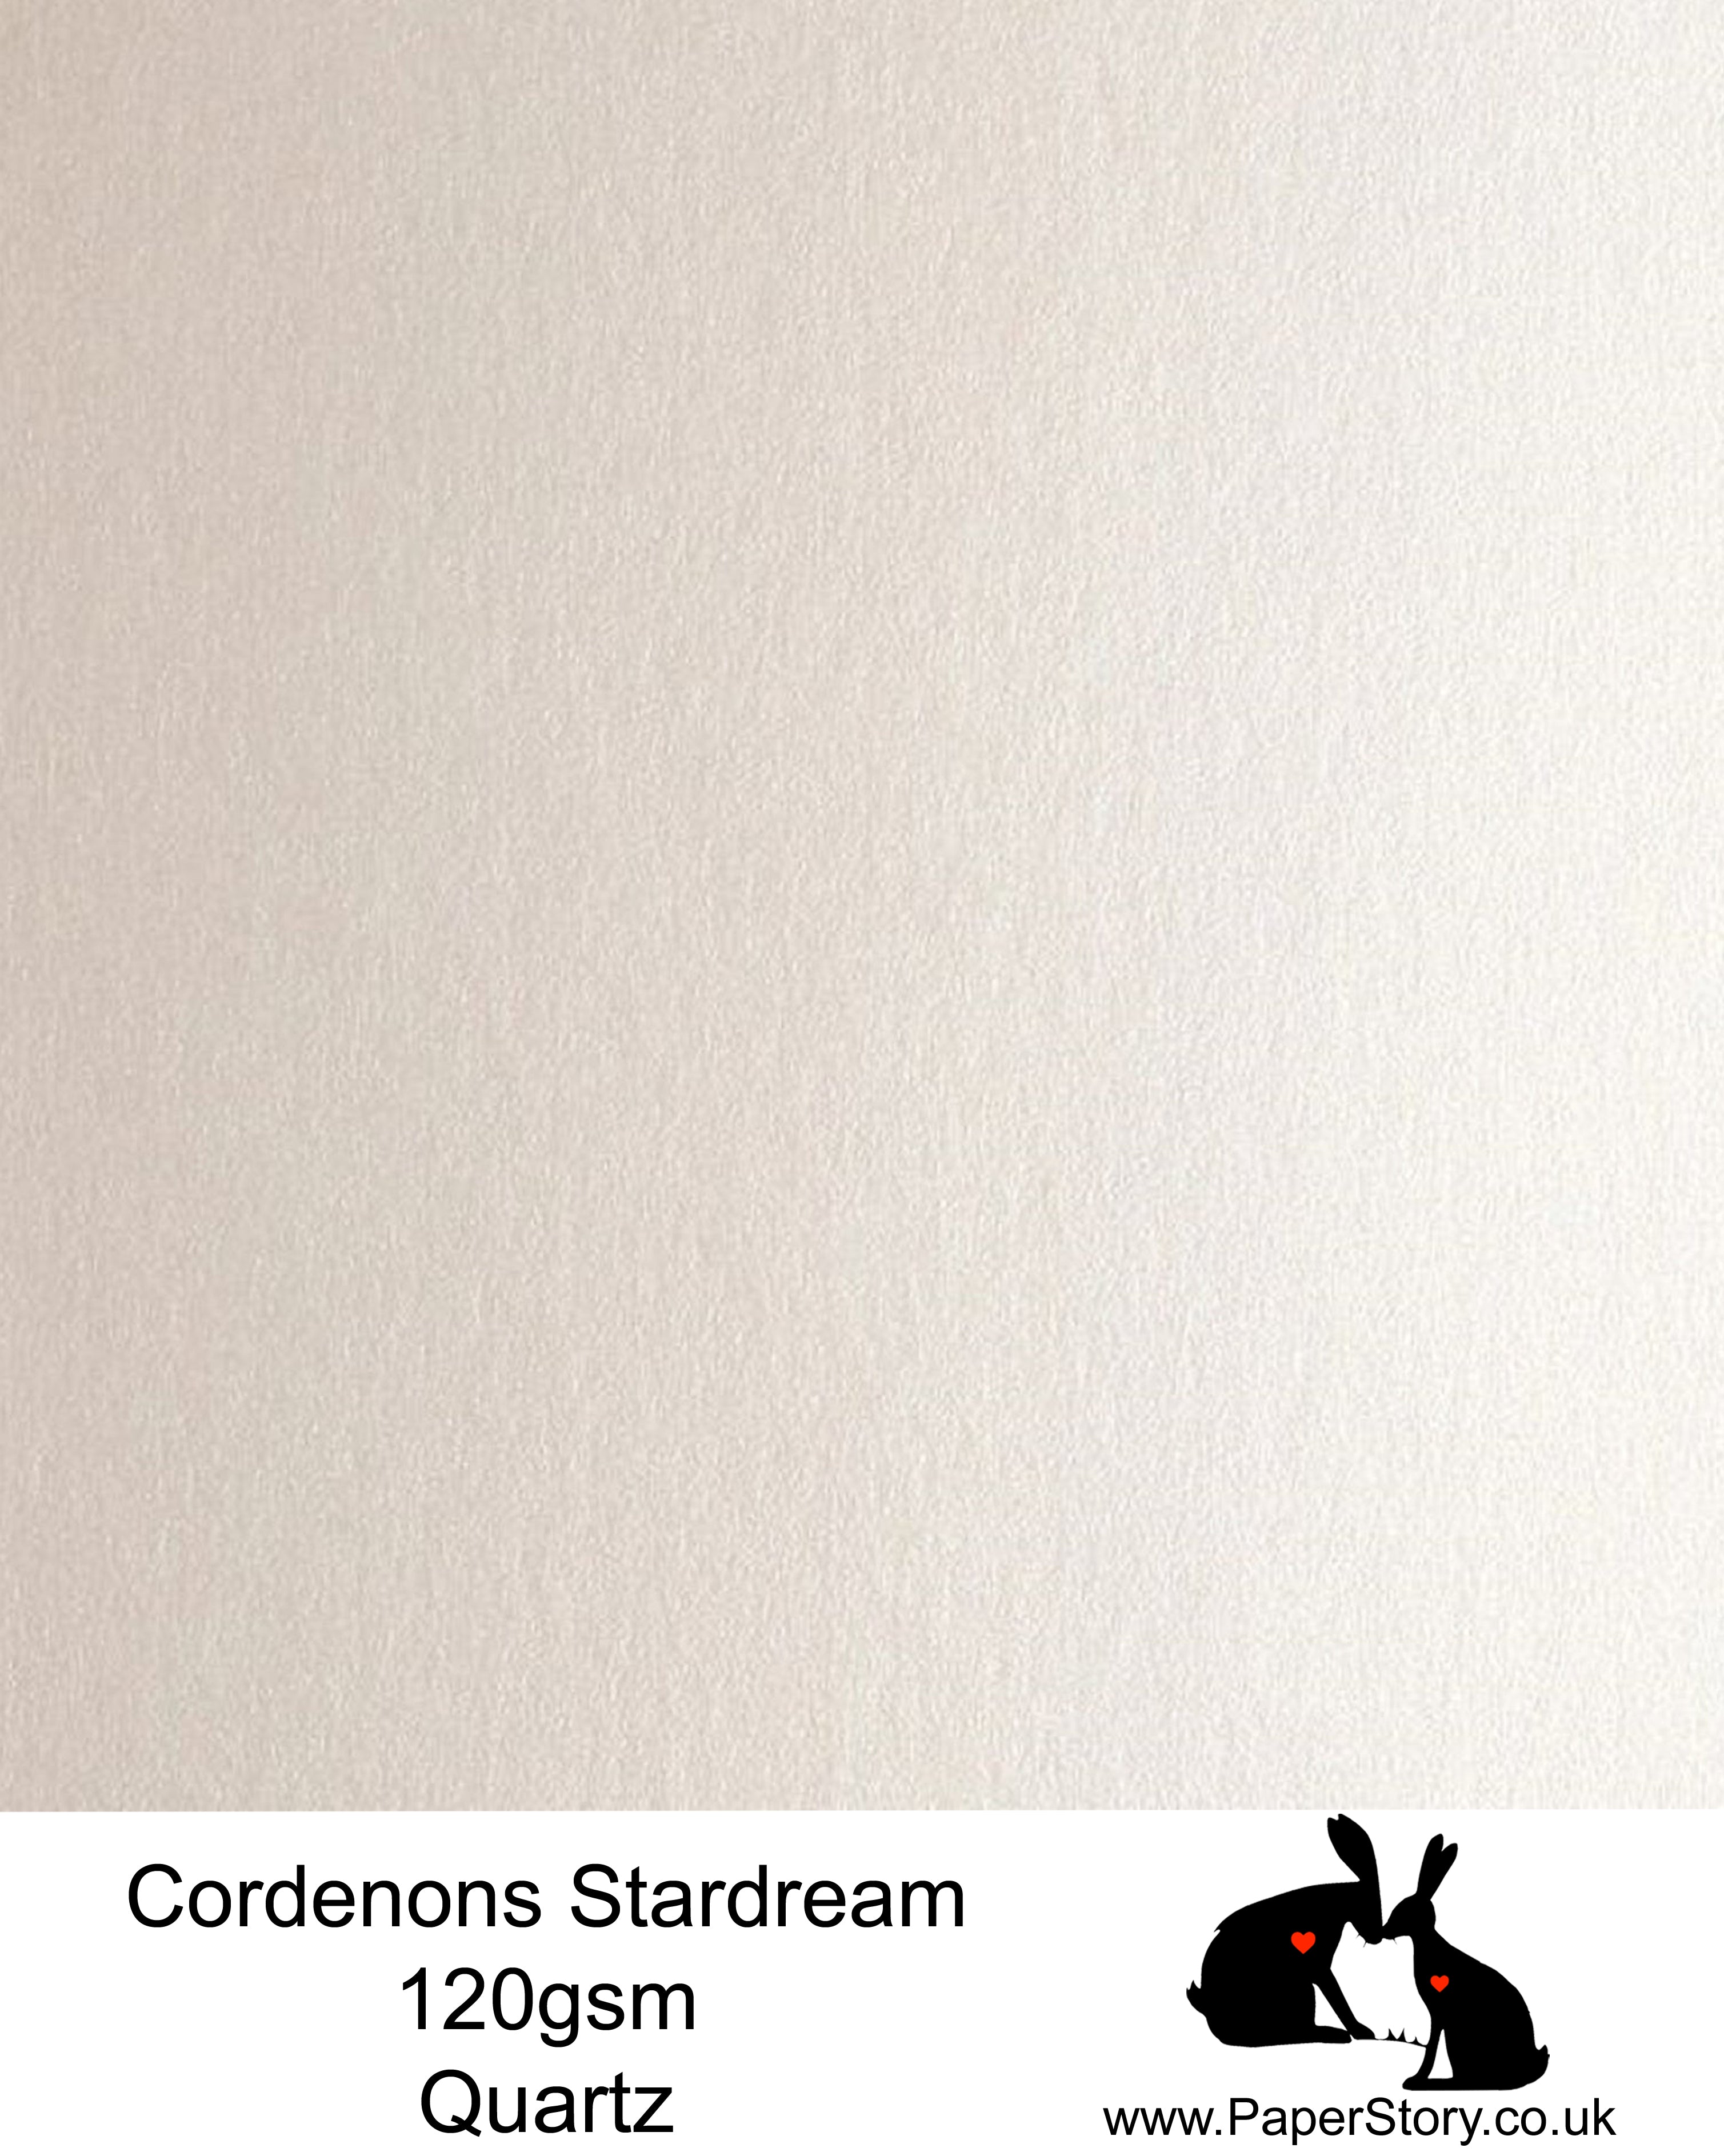 A4 Stardream 120gsm paper for Papercutting, craft, flower making  and wedding stationery. White quartz, has a warm undertone with a beustiful shimmer, making this a classic Ivory colour, perfect for flowers and wedding stationery. Stardream is a luxury Italian paper from Italy, it is a double sided quality Pearlescent paper with a matching colour core. FSC Certified, acid free, archival and PH Neutral